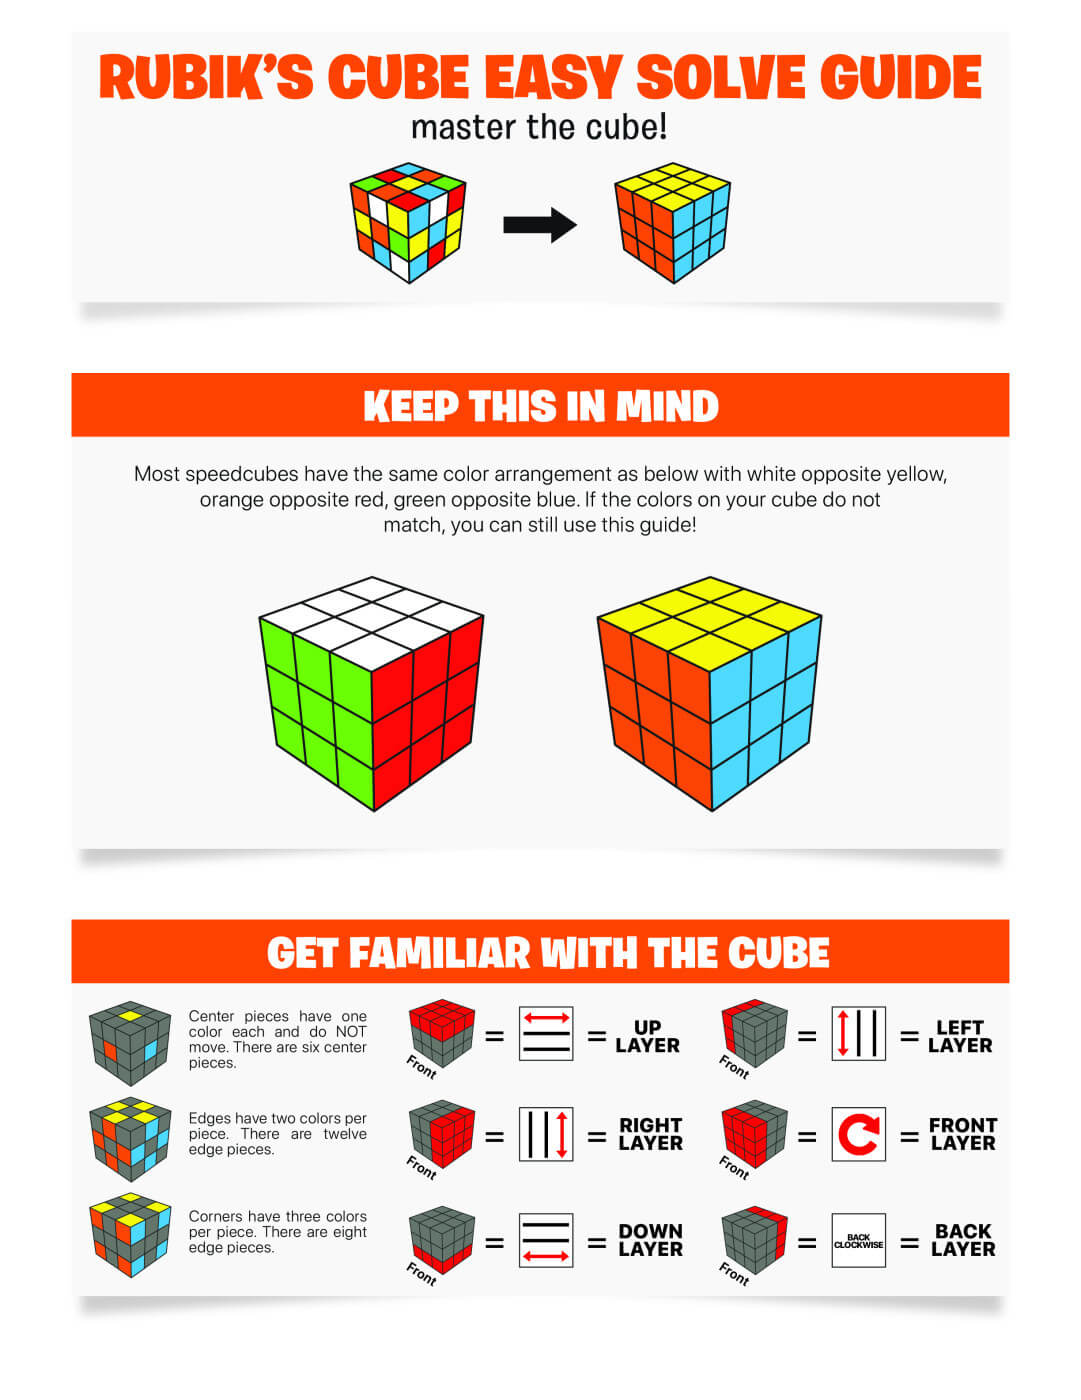 How to solve a rubik's cube for beginners – SpeedCubeShop